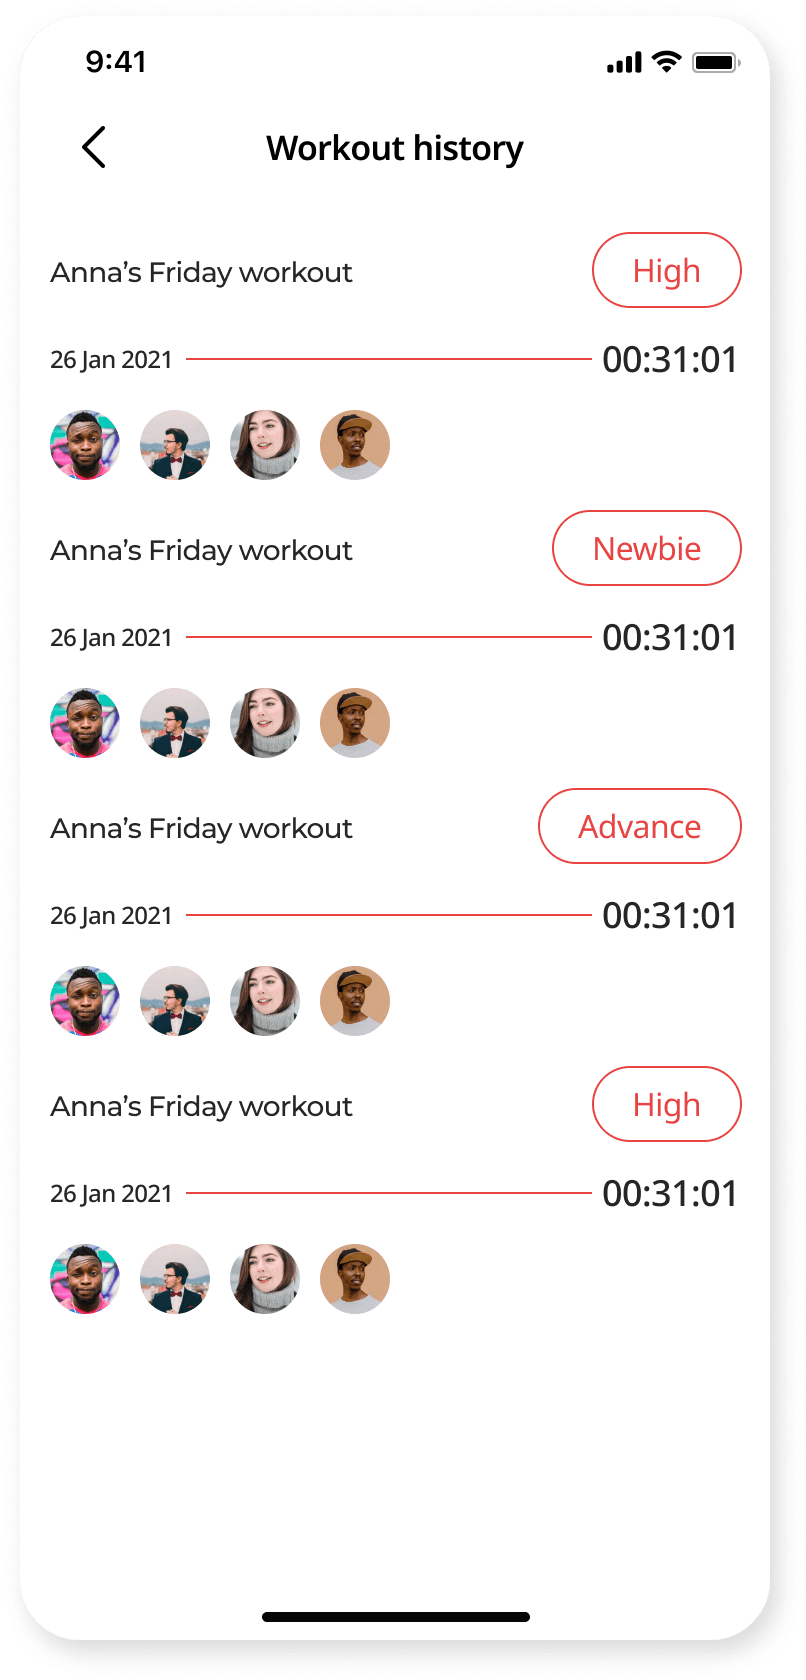 fitkonnect app workout history